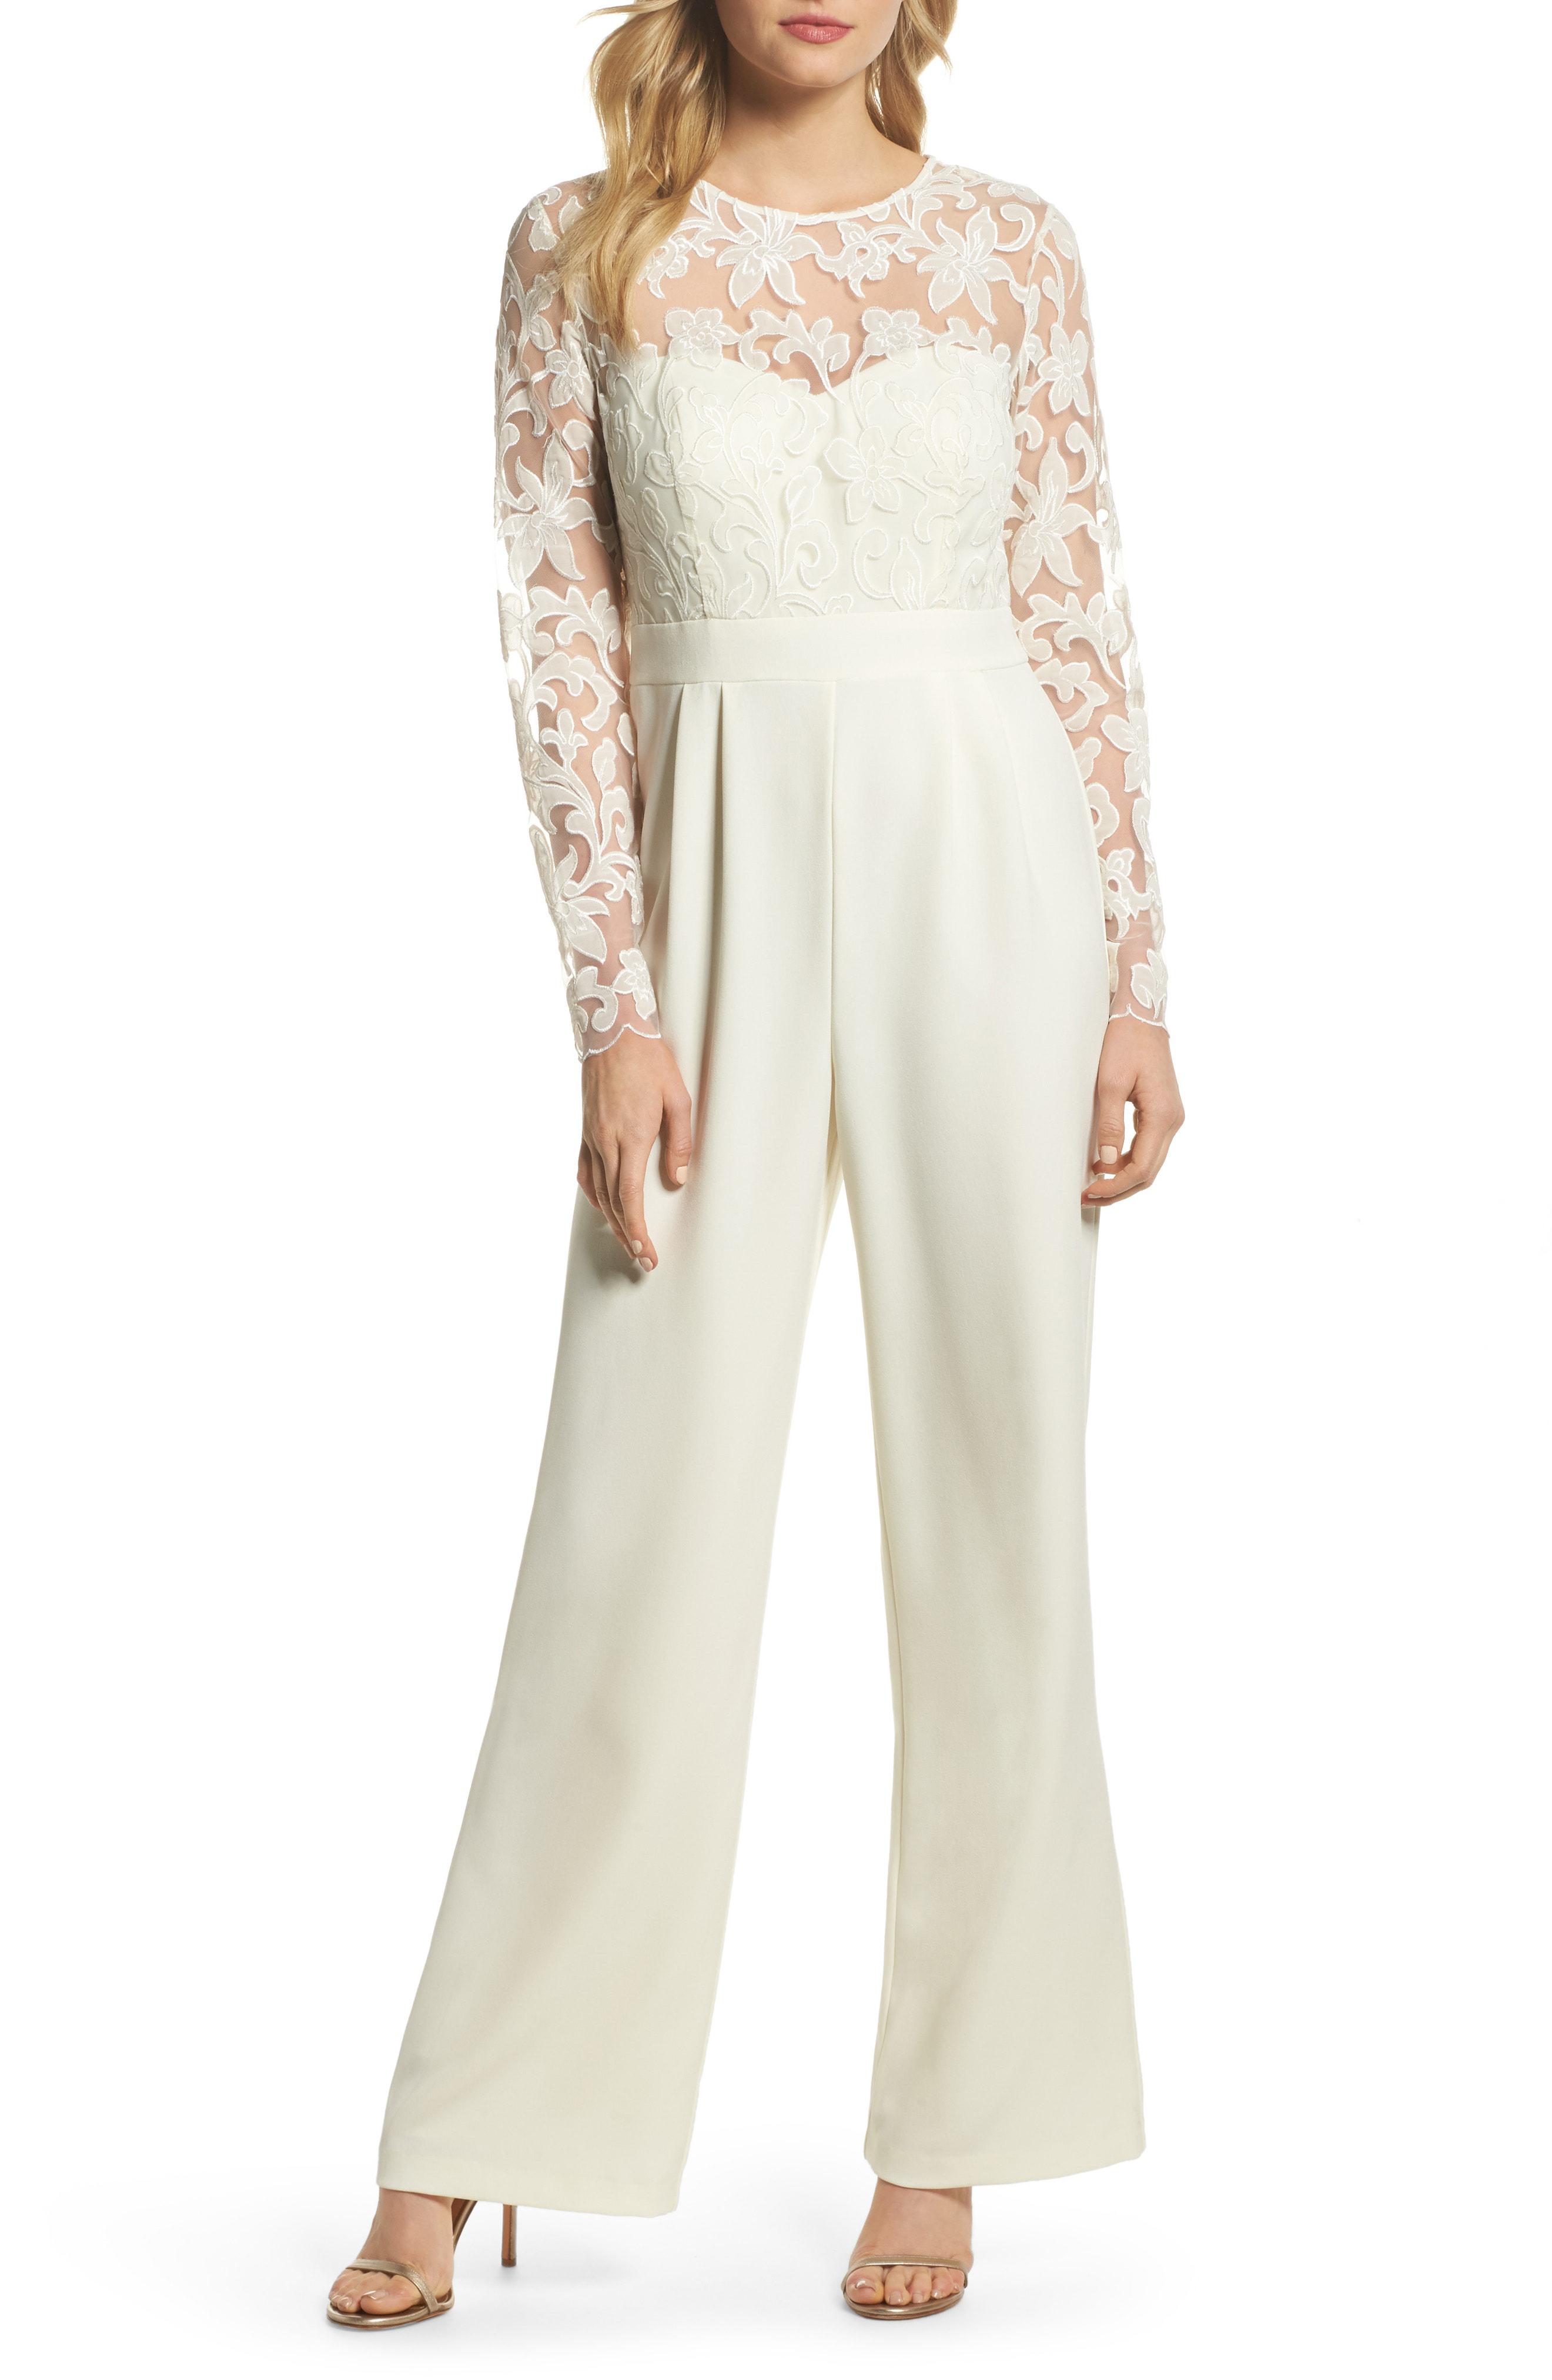 Lyst - Eliza J Embroidered Bodice Wide Leg Jumpsuit in Natural